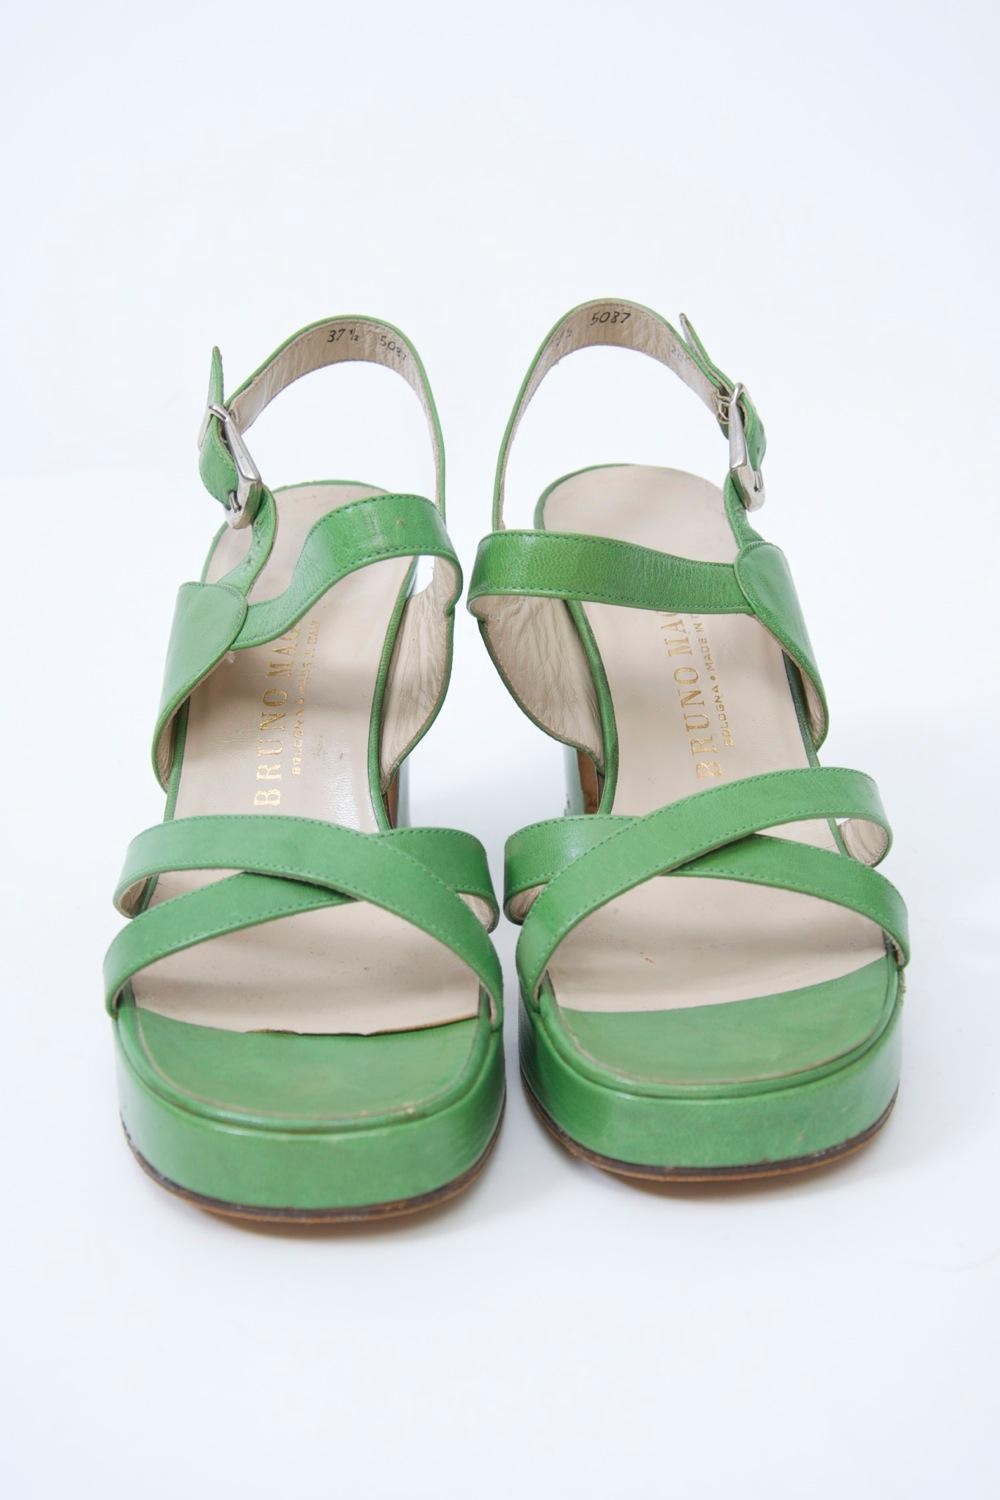 Iconic 1970s platform sandals by Bruno Magli in bright green leather featuring crossed straps in front, a buckled strap in back, and a 3 1/2